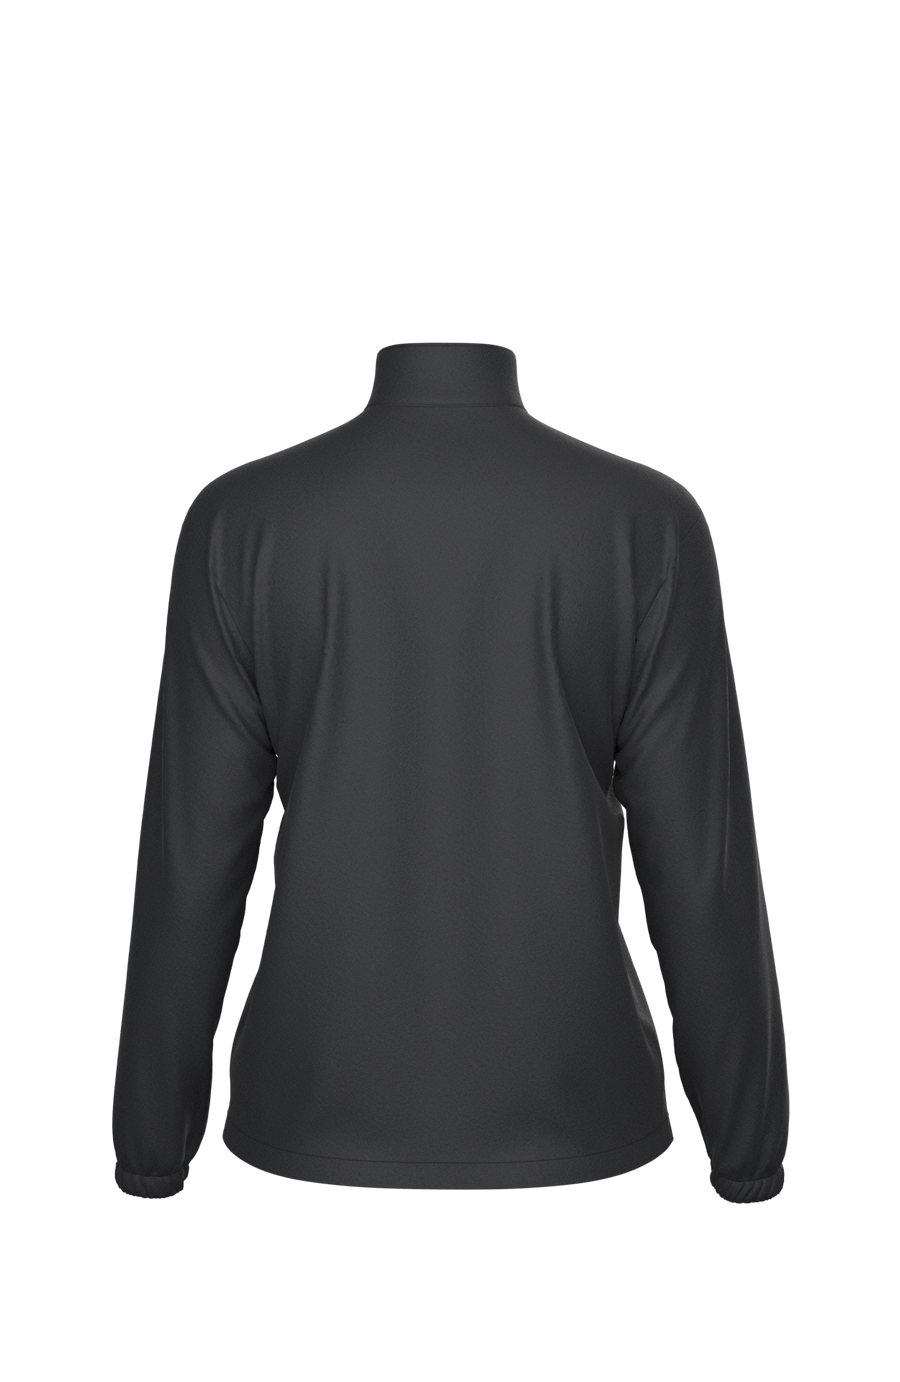 $20.00 Caño - Women’s 1/4 Zip V-Design Jacket (Fitted)